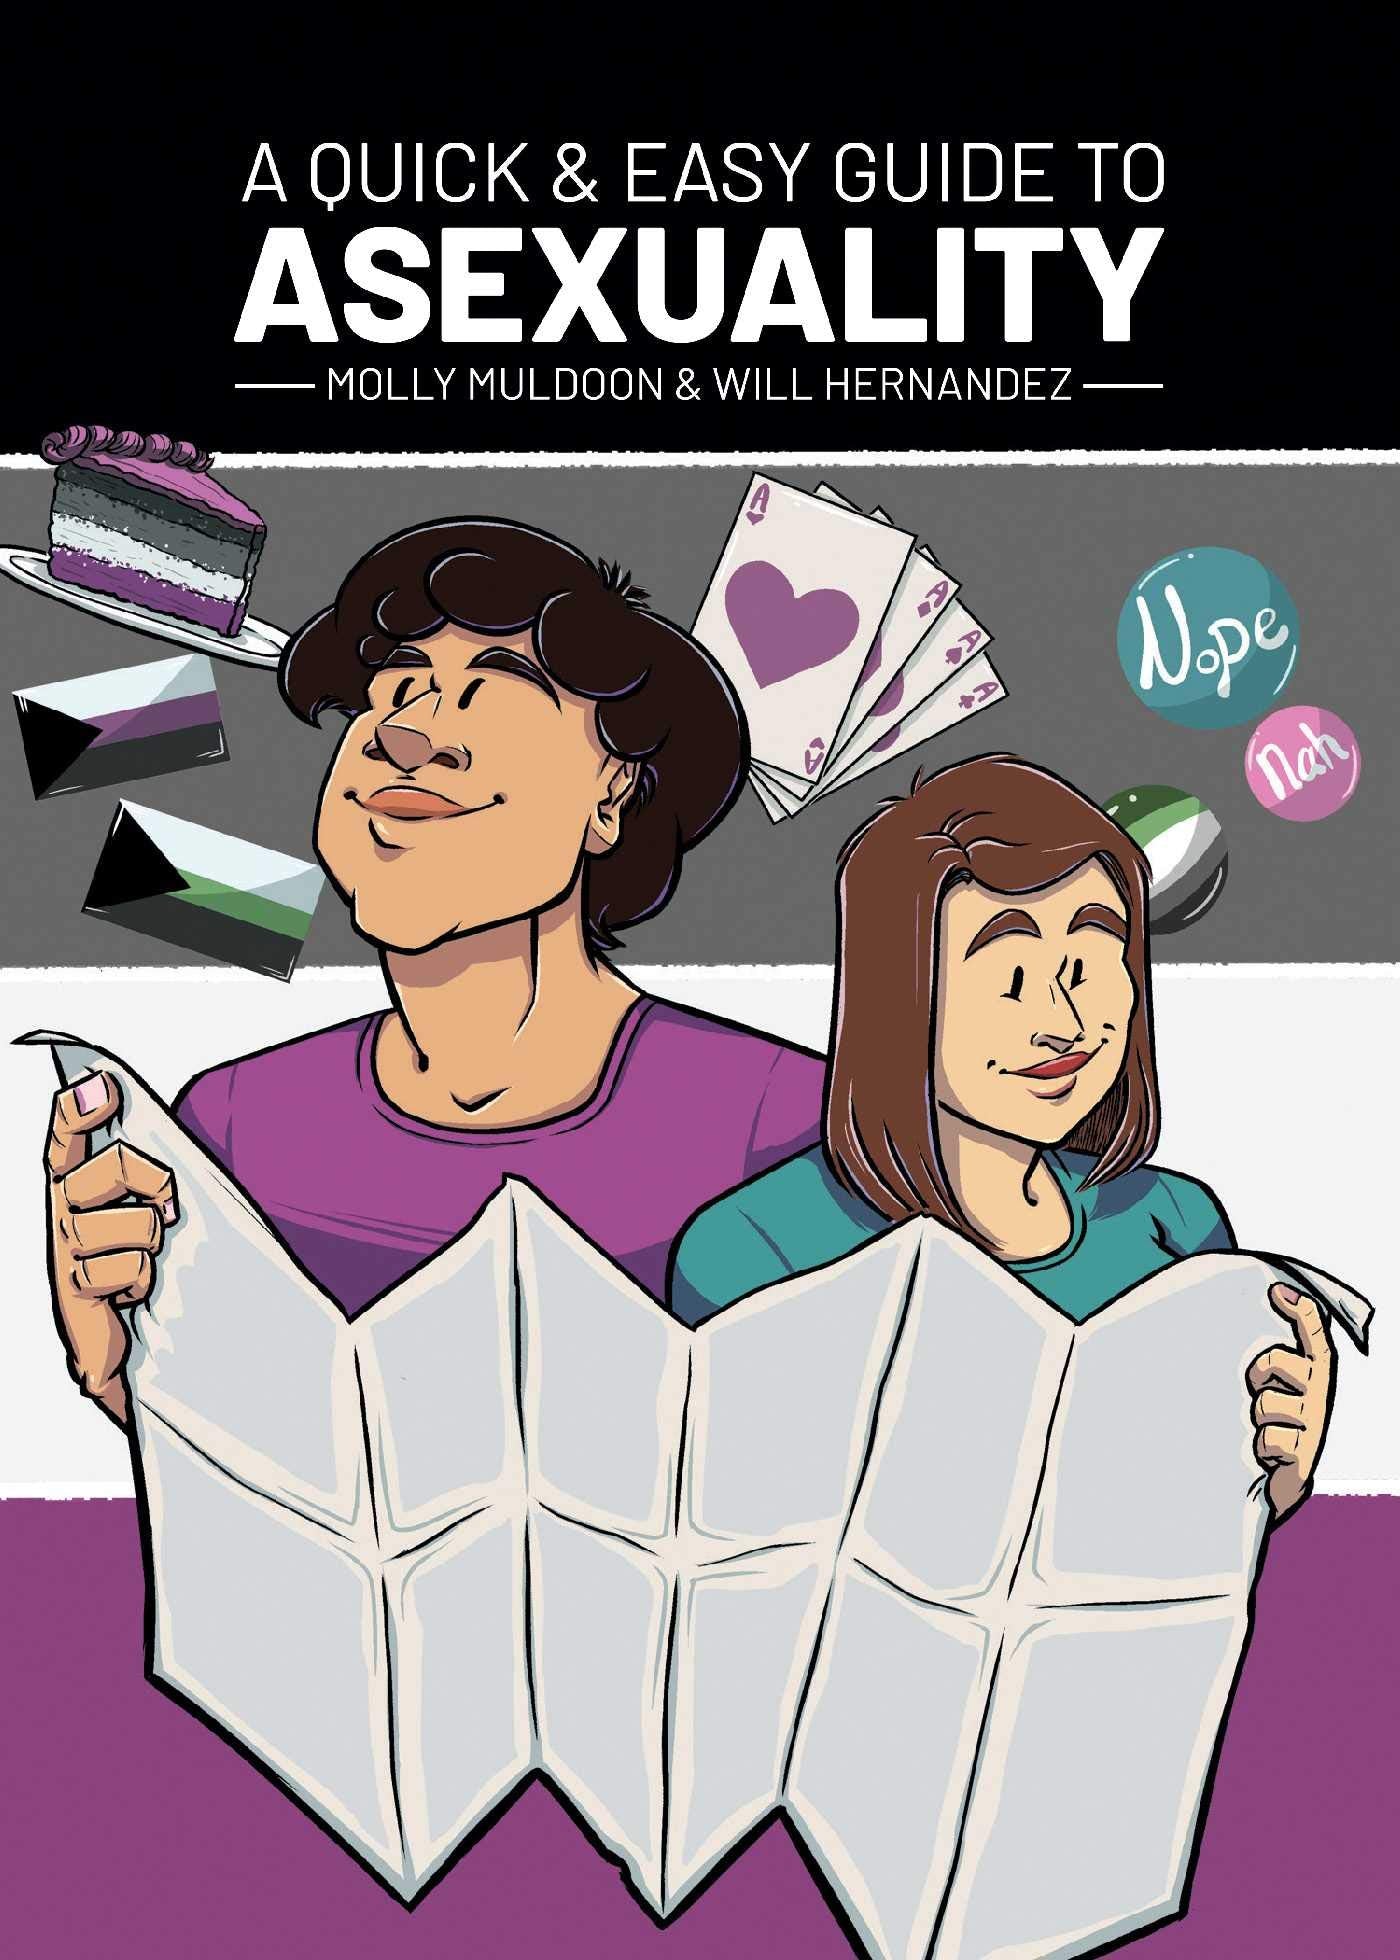 A Quick & Easy Guide to Asexuality (Quick & Easy Guides)